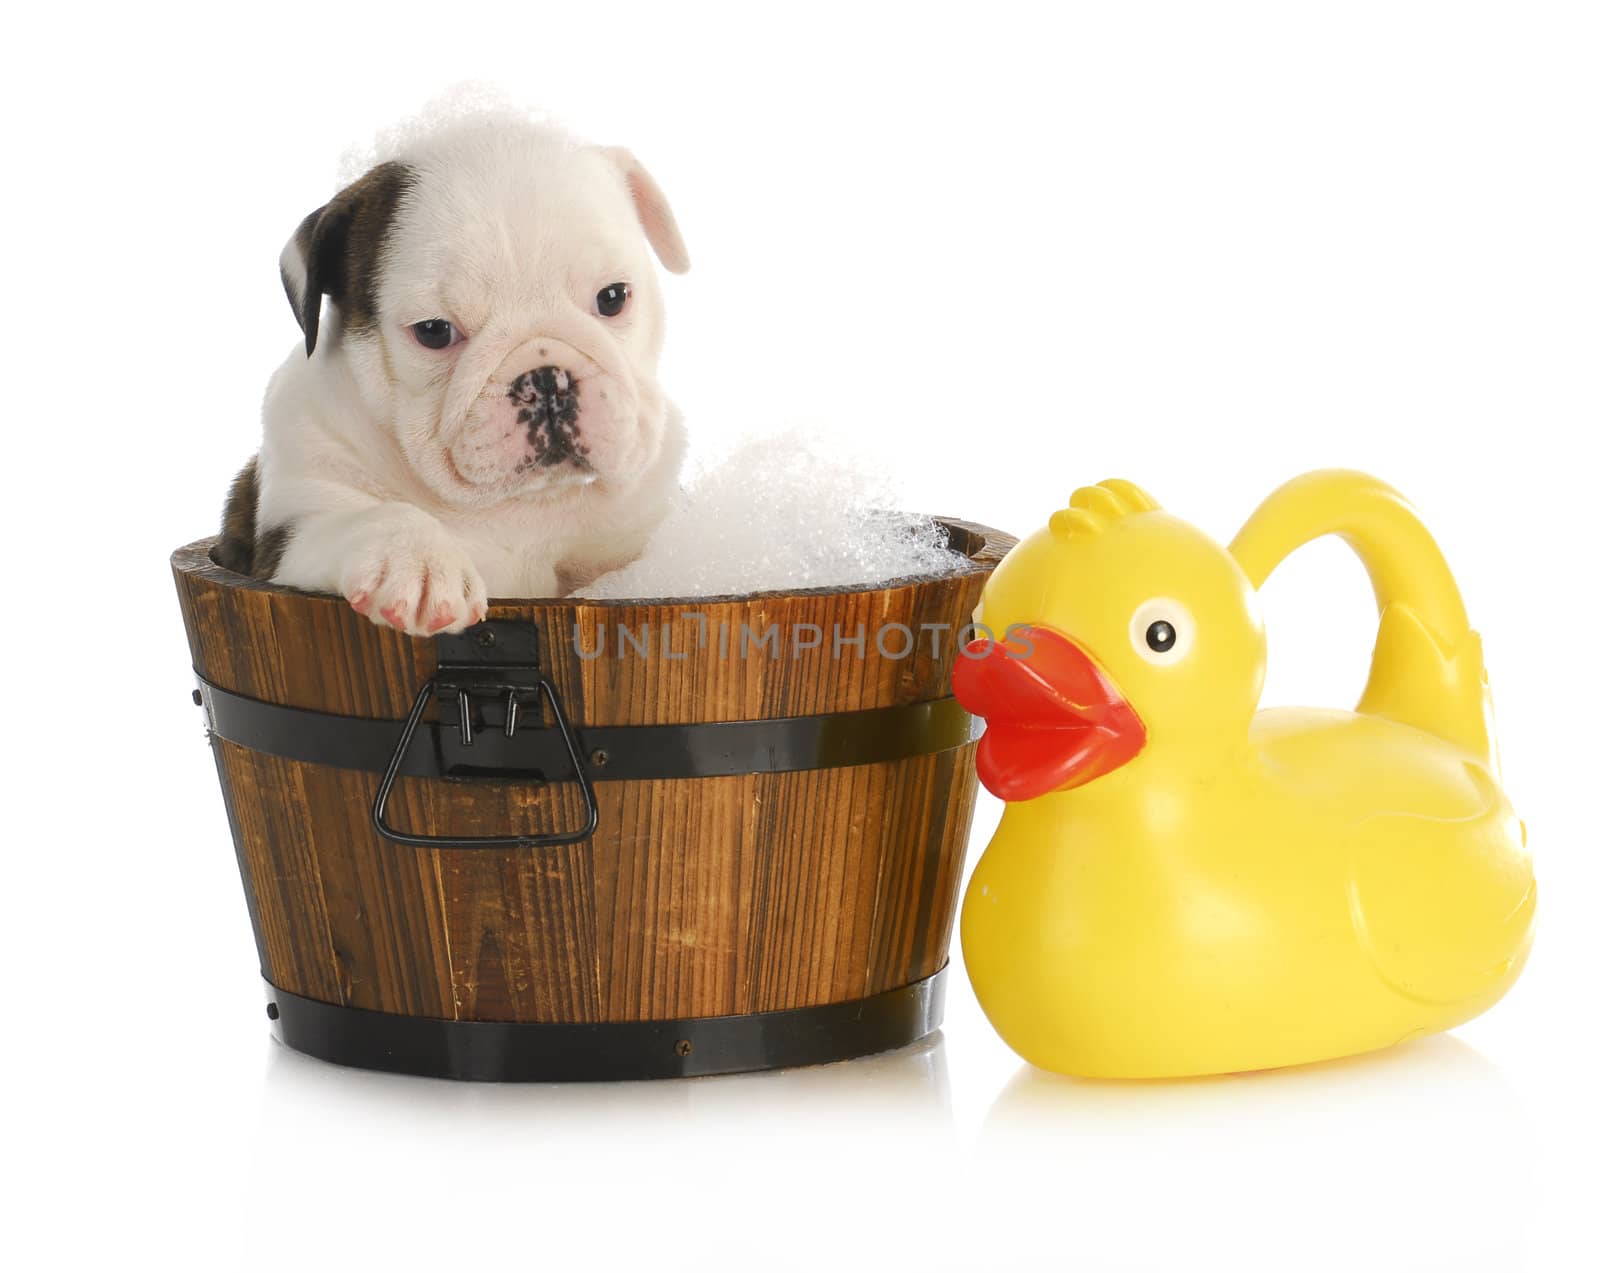 puppy bath time - english bulldog puppy in wooden wash basin with soap suds and rubber duck